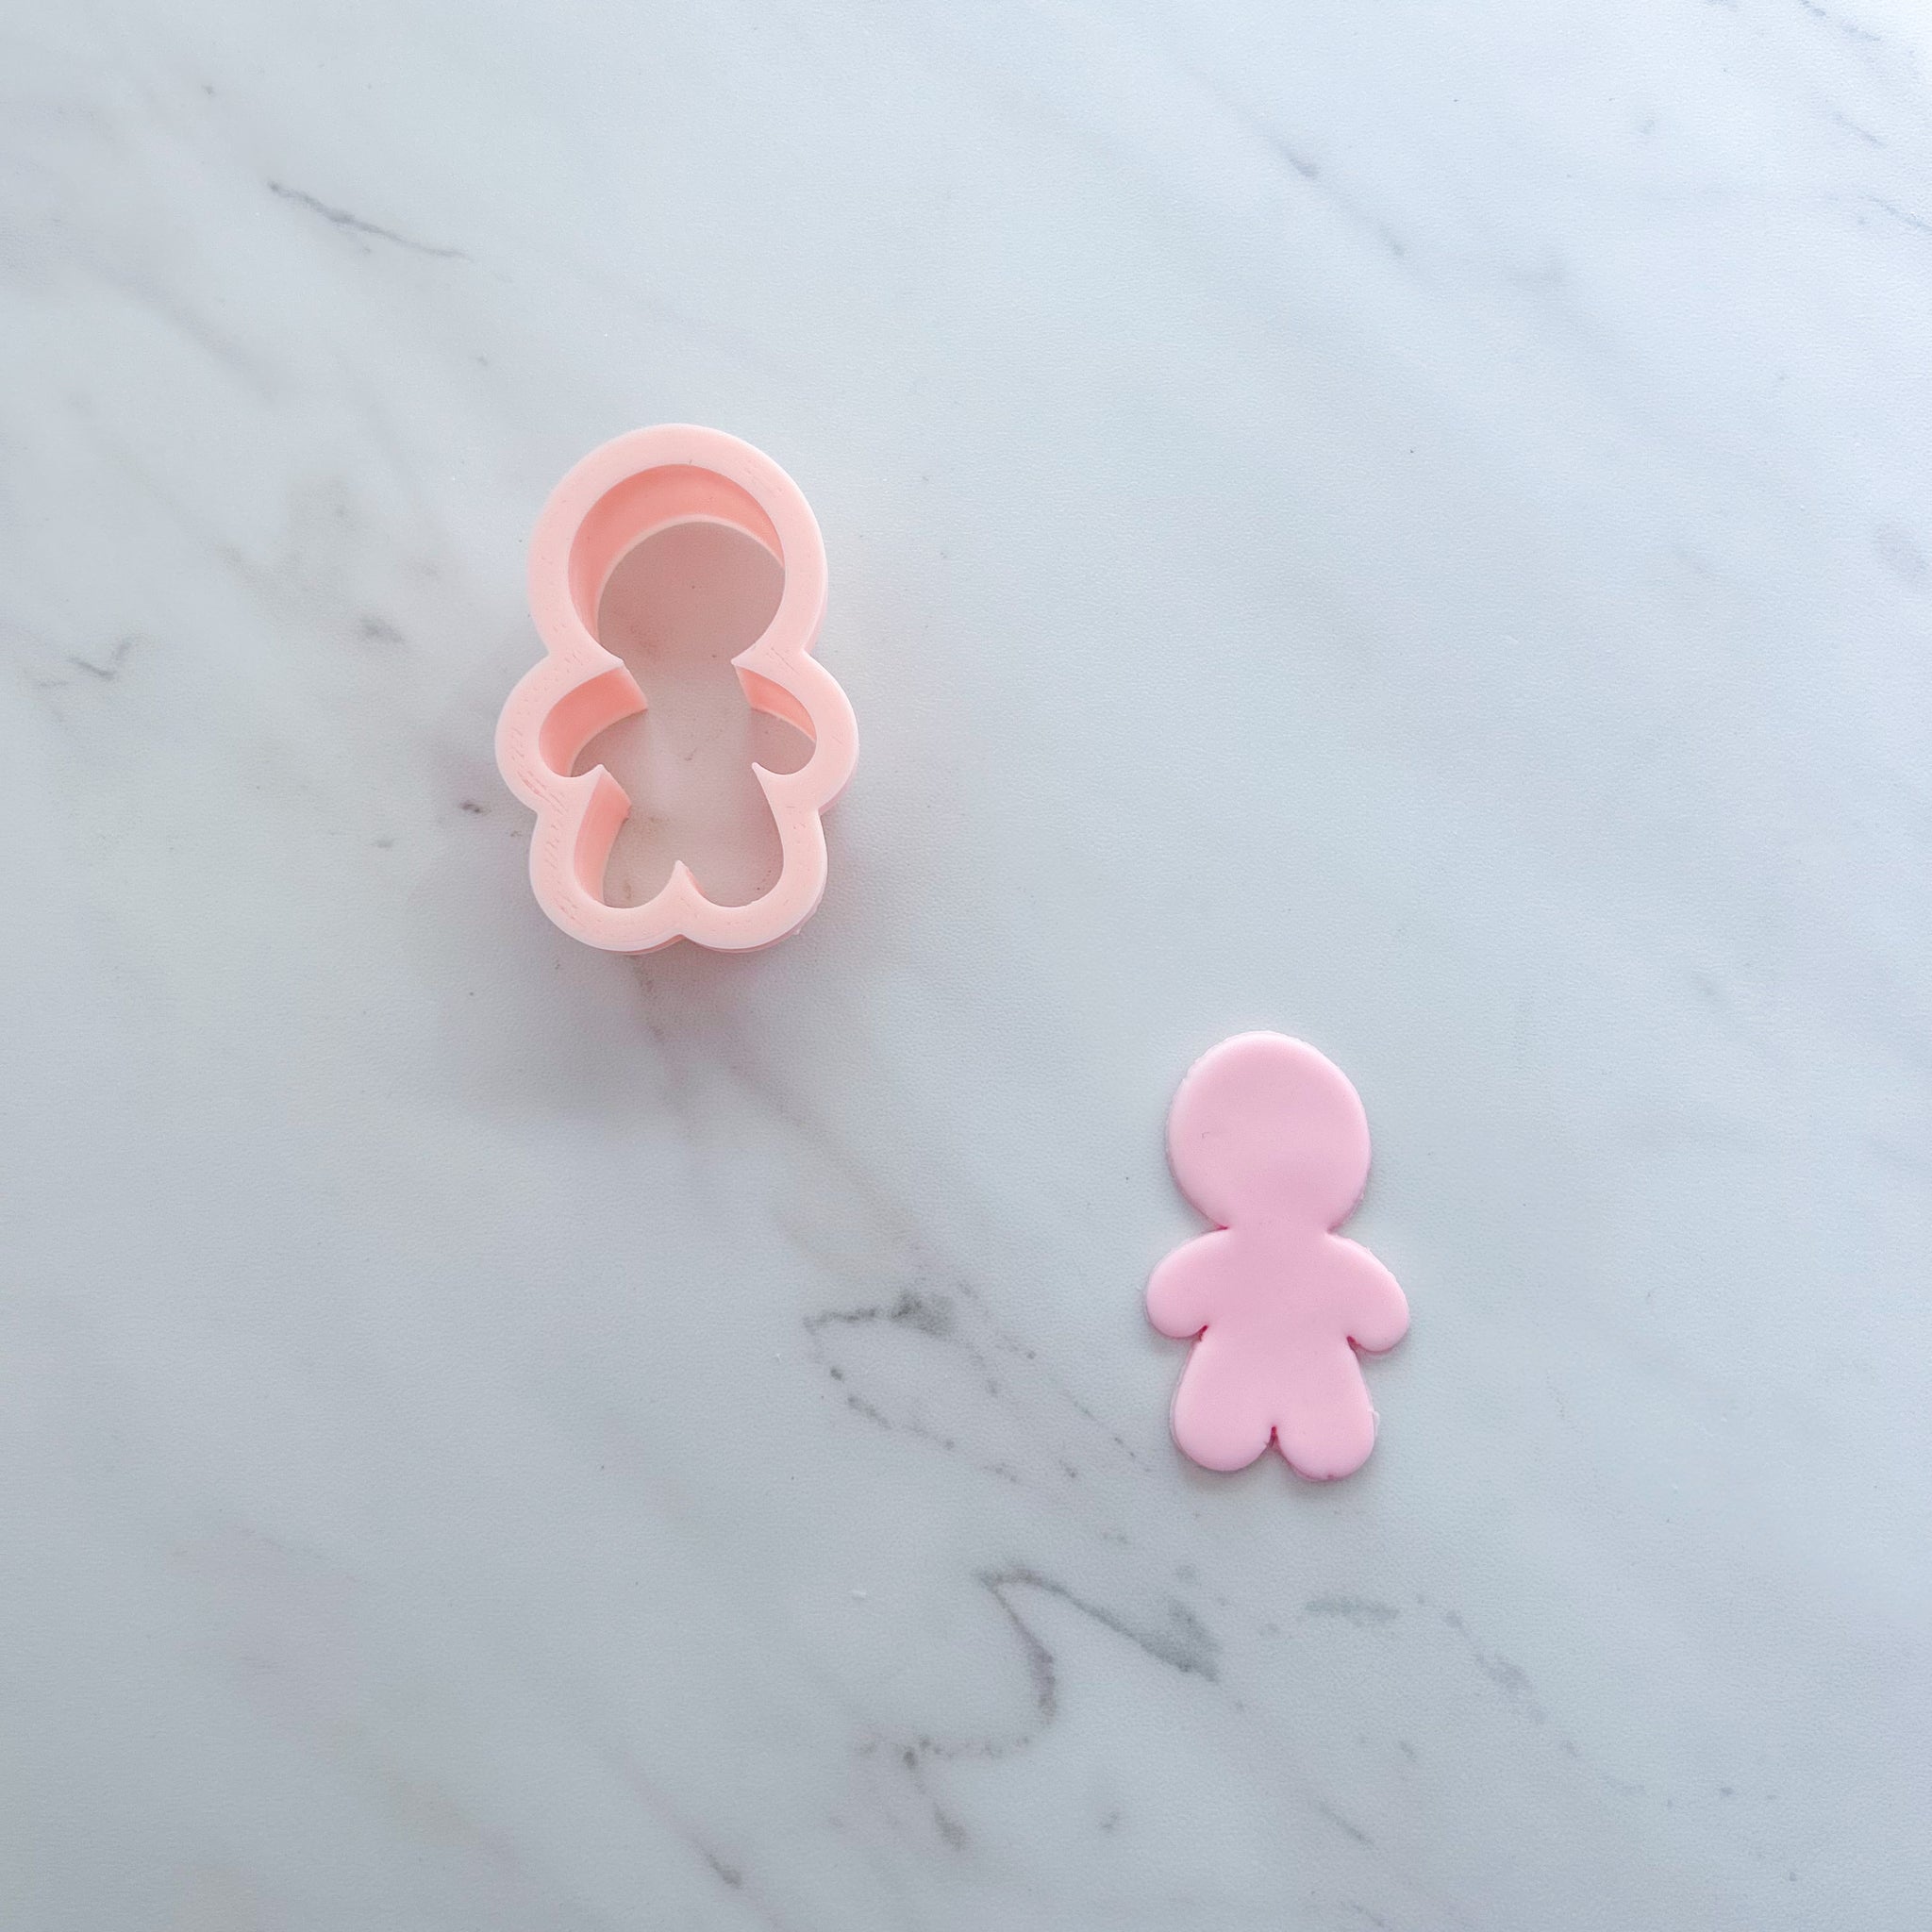 MINI GINGERBREAD MAN COOKIE CUTTER BY SAIDAS SWEETS